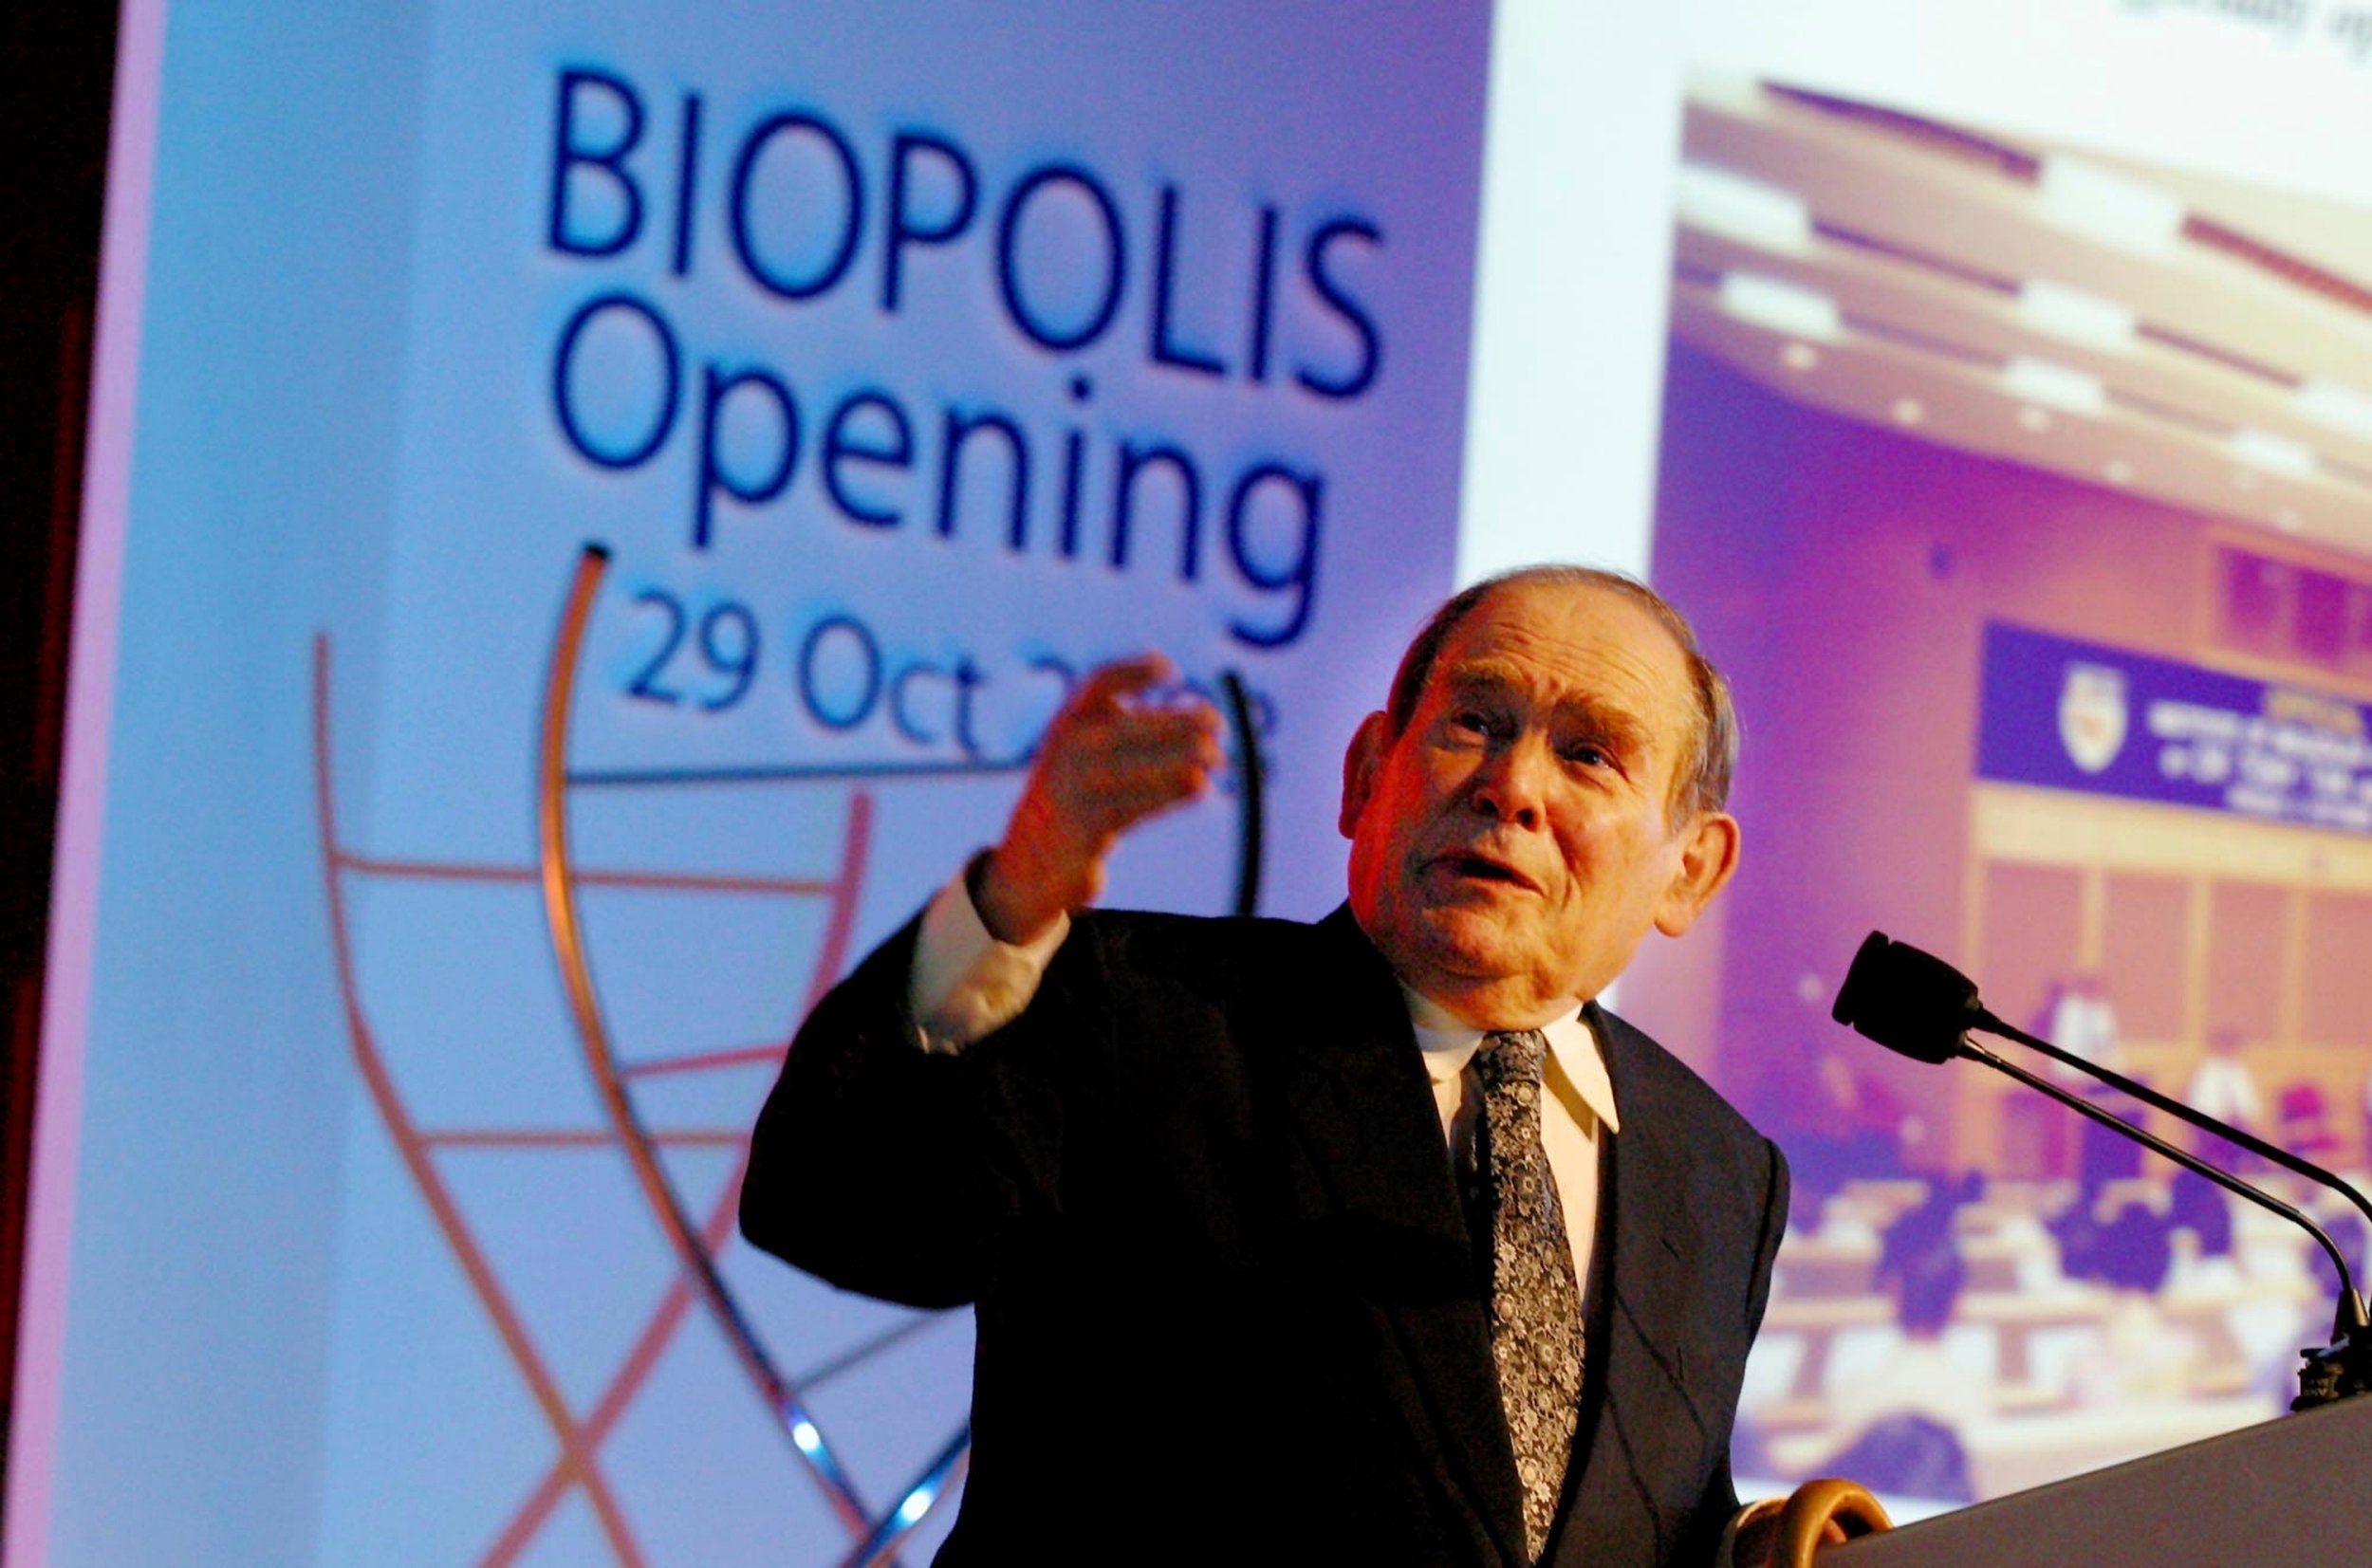 Nobel laureate Dr Sydney Brenner gives a lecture at the 2003 opening of Biopolis in Singapore